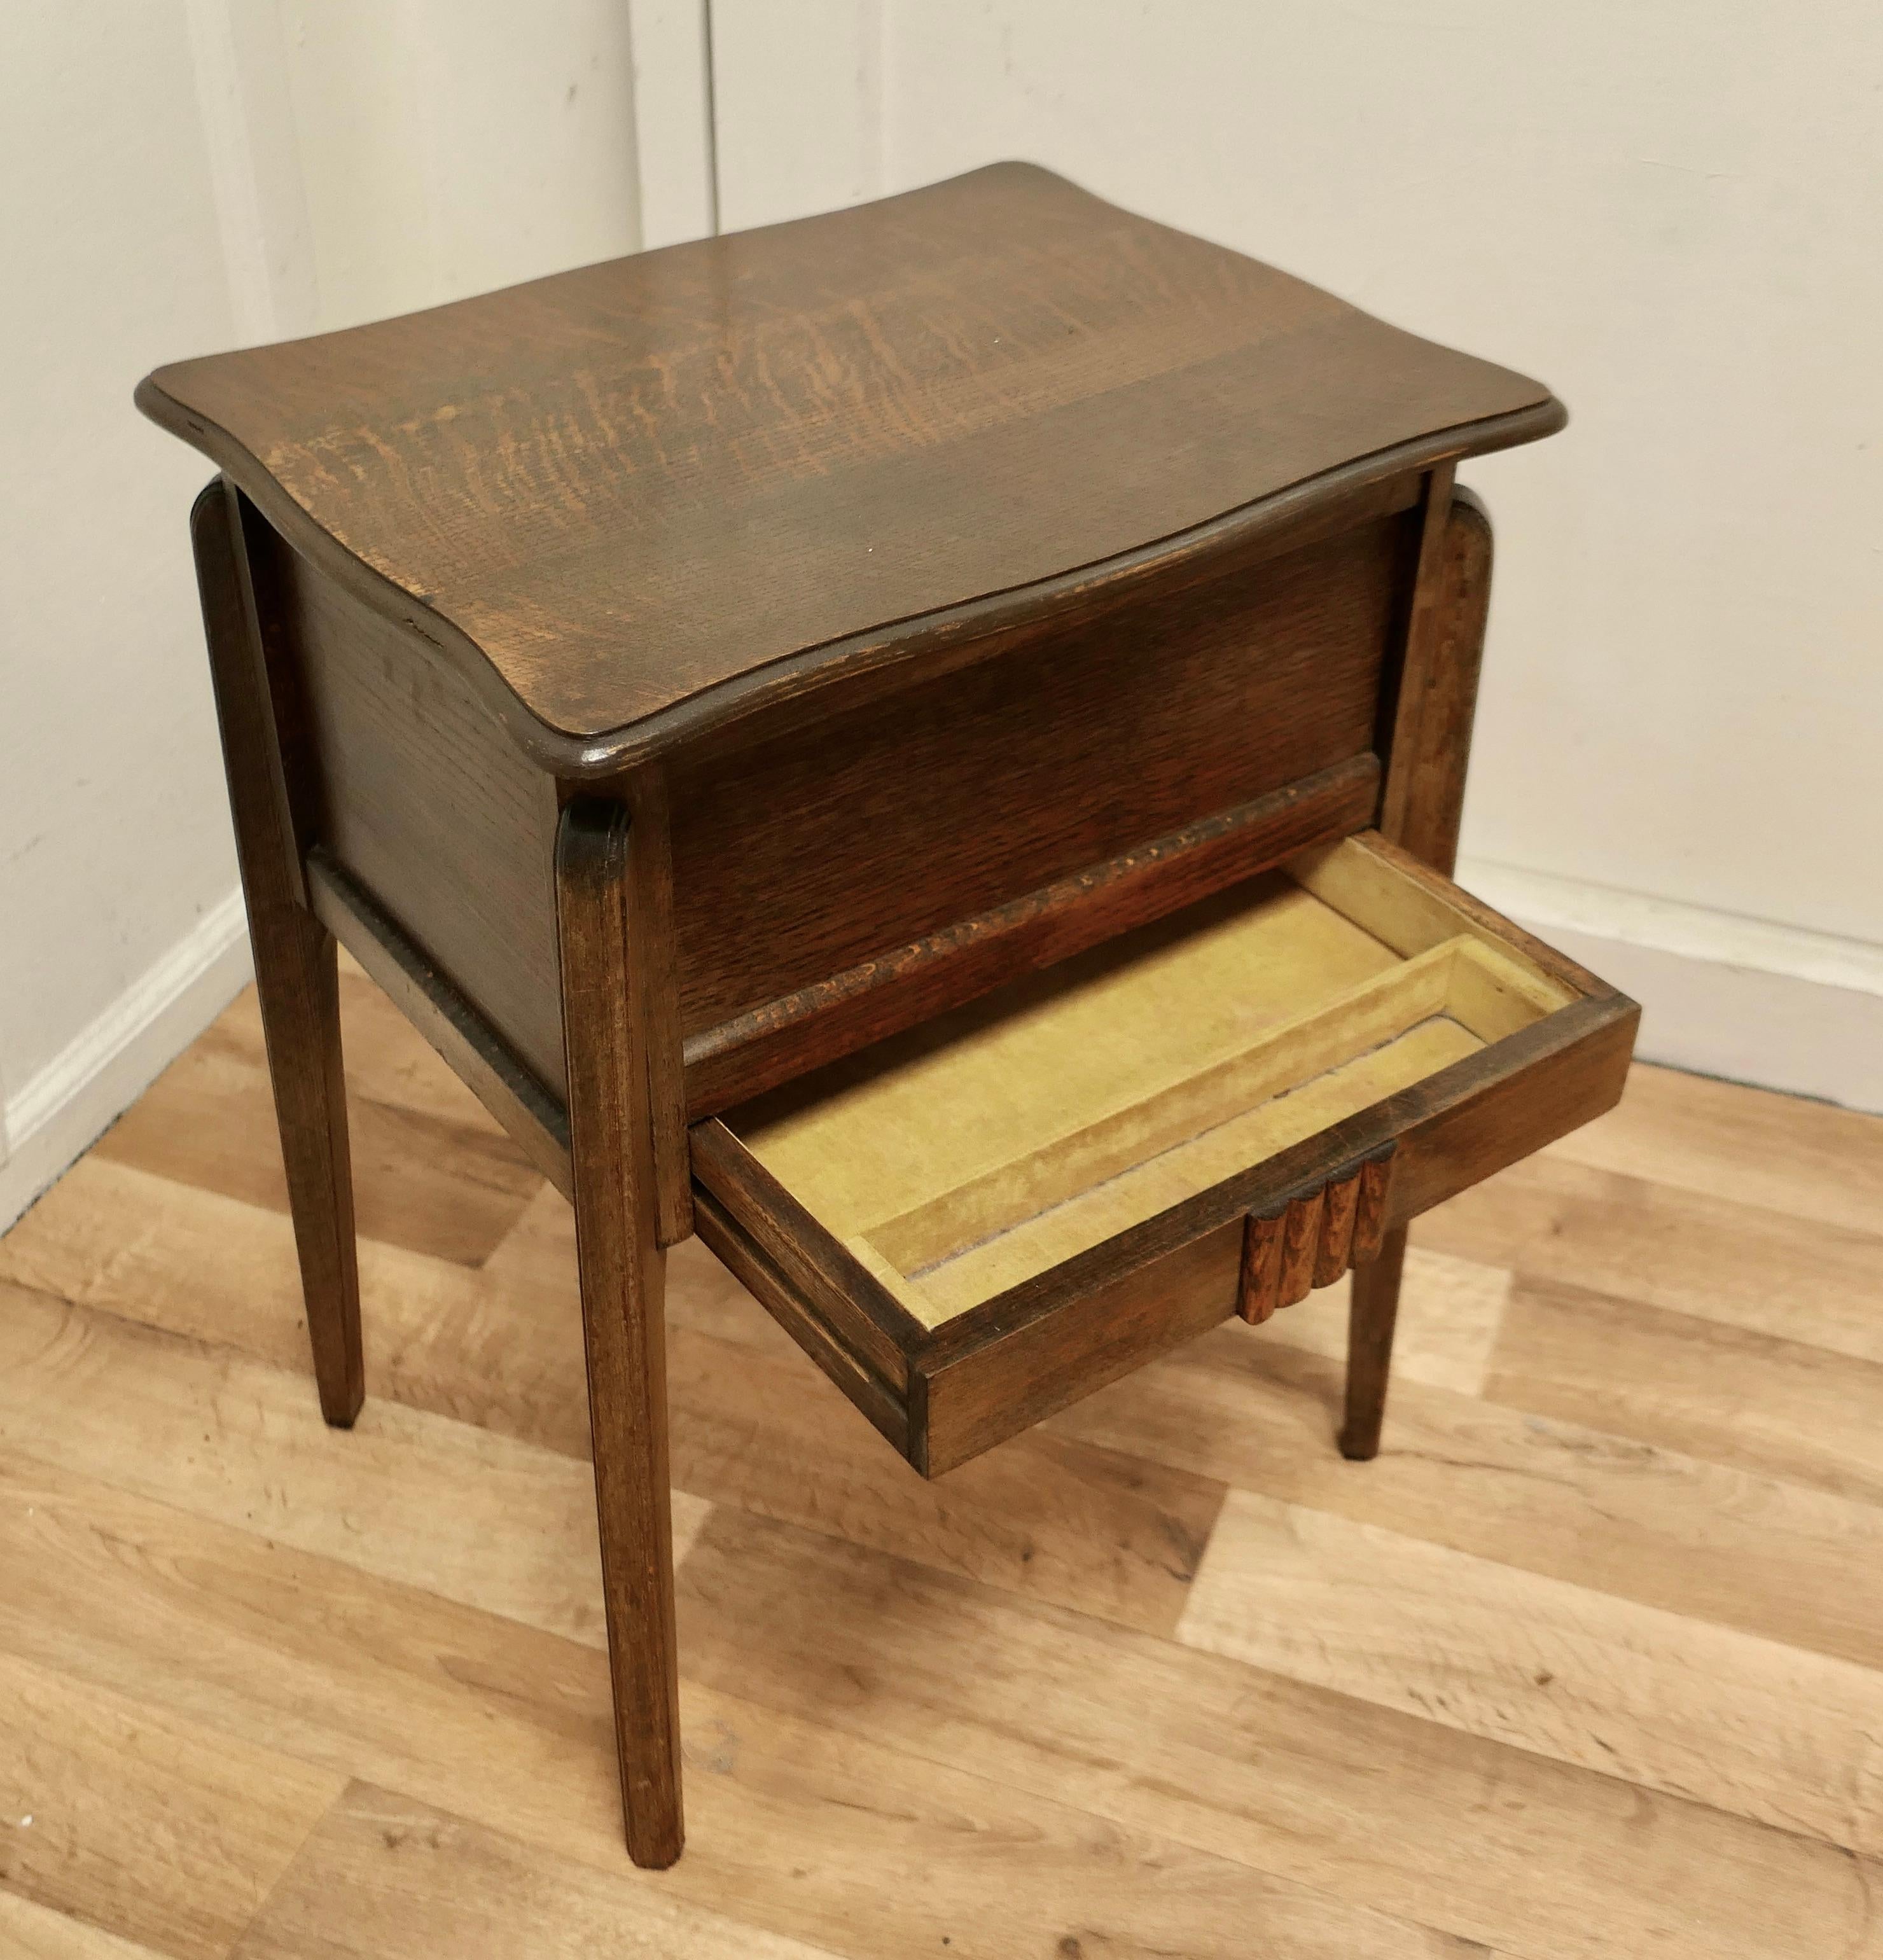 1930s sewing box on legs